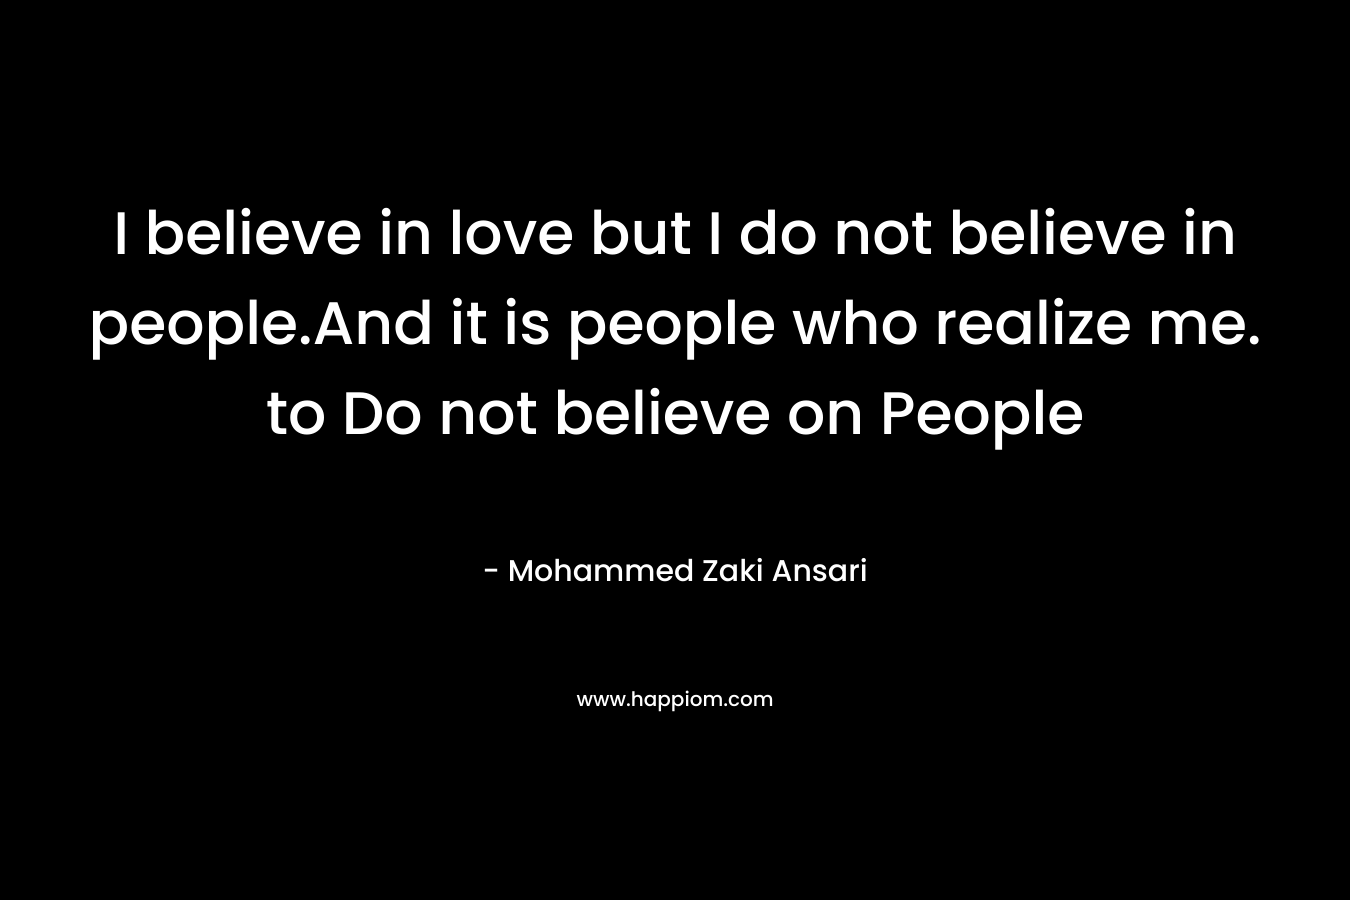 I believe in love but I do not believe in people.And it is people who realize me. to Do not believe on People